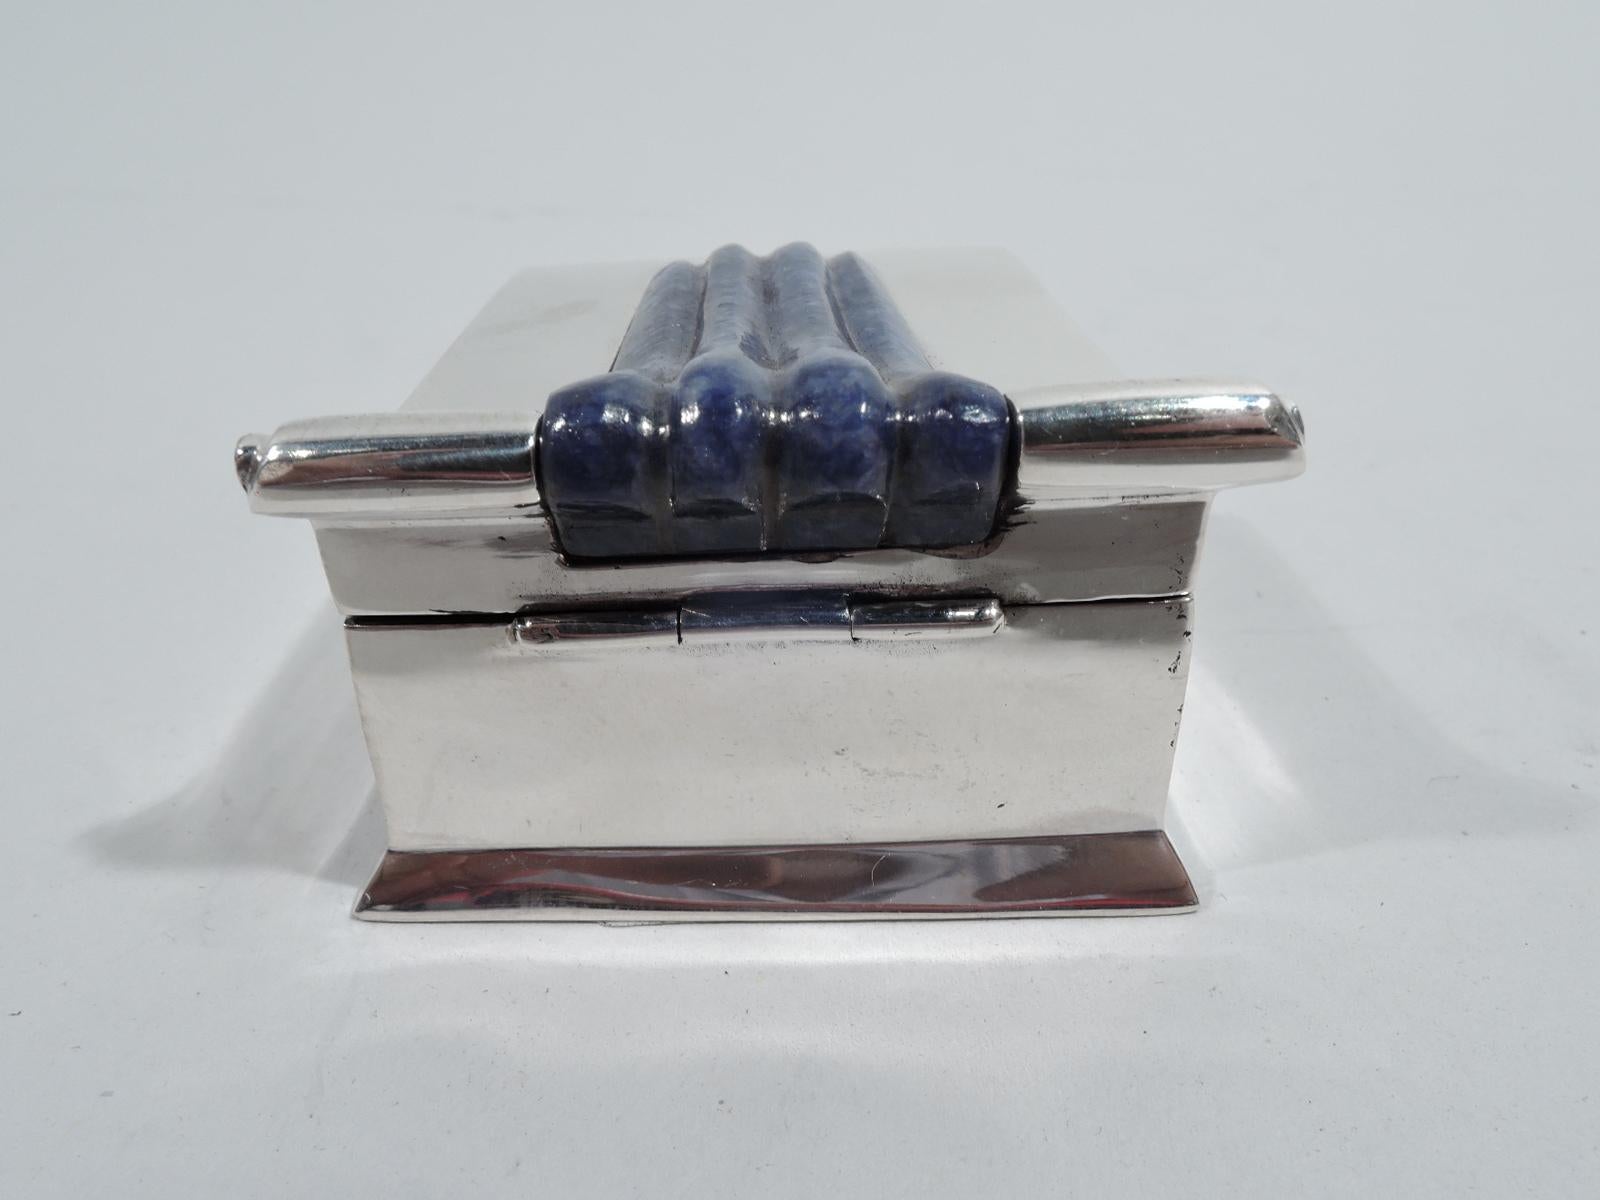 Modern Classical 950 silver pillbox. Trapezoidal with spread base. Cover hinged and inset with lapis lazuli flutes. Fully marked including stamp for Vancox, a Brazilian jeweler.